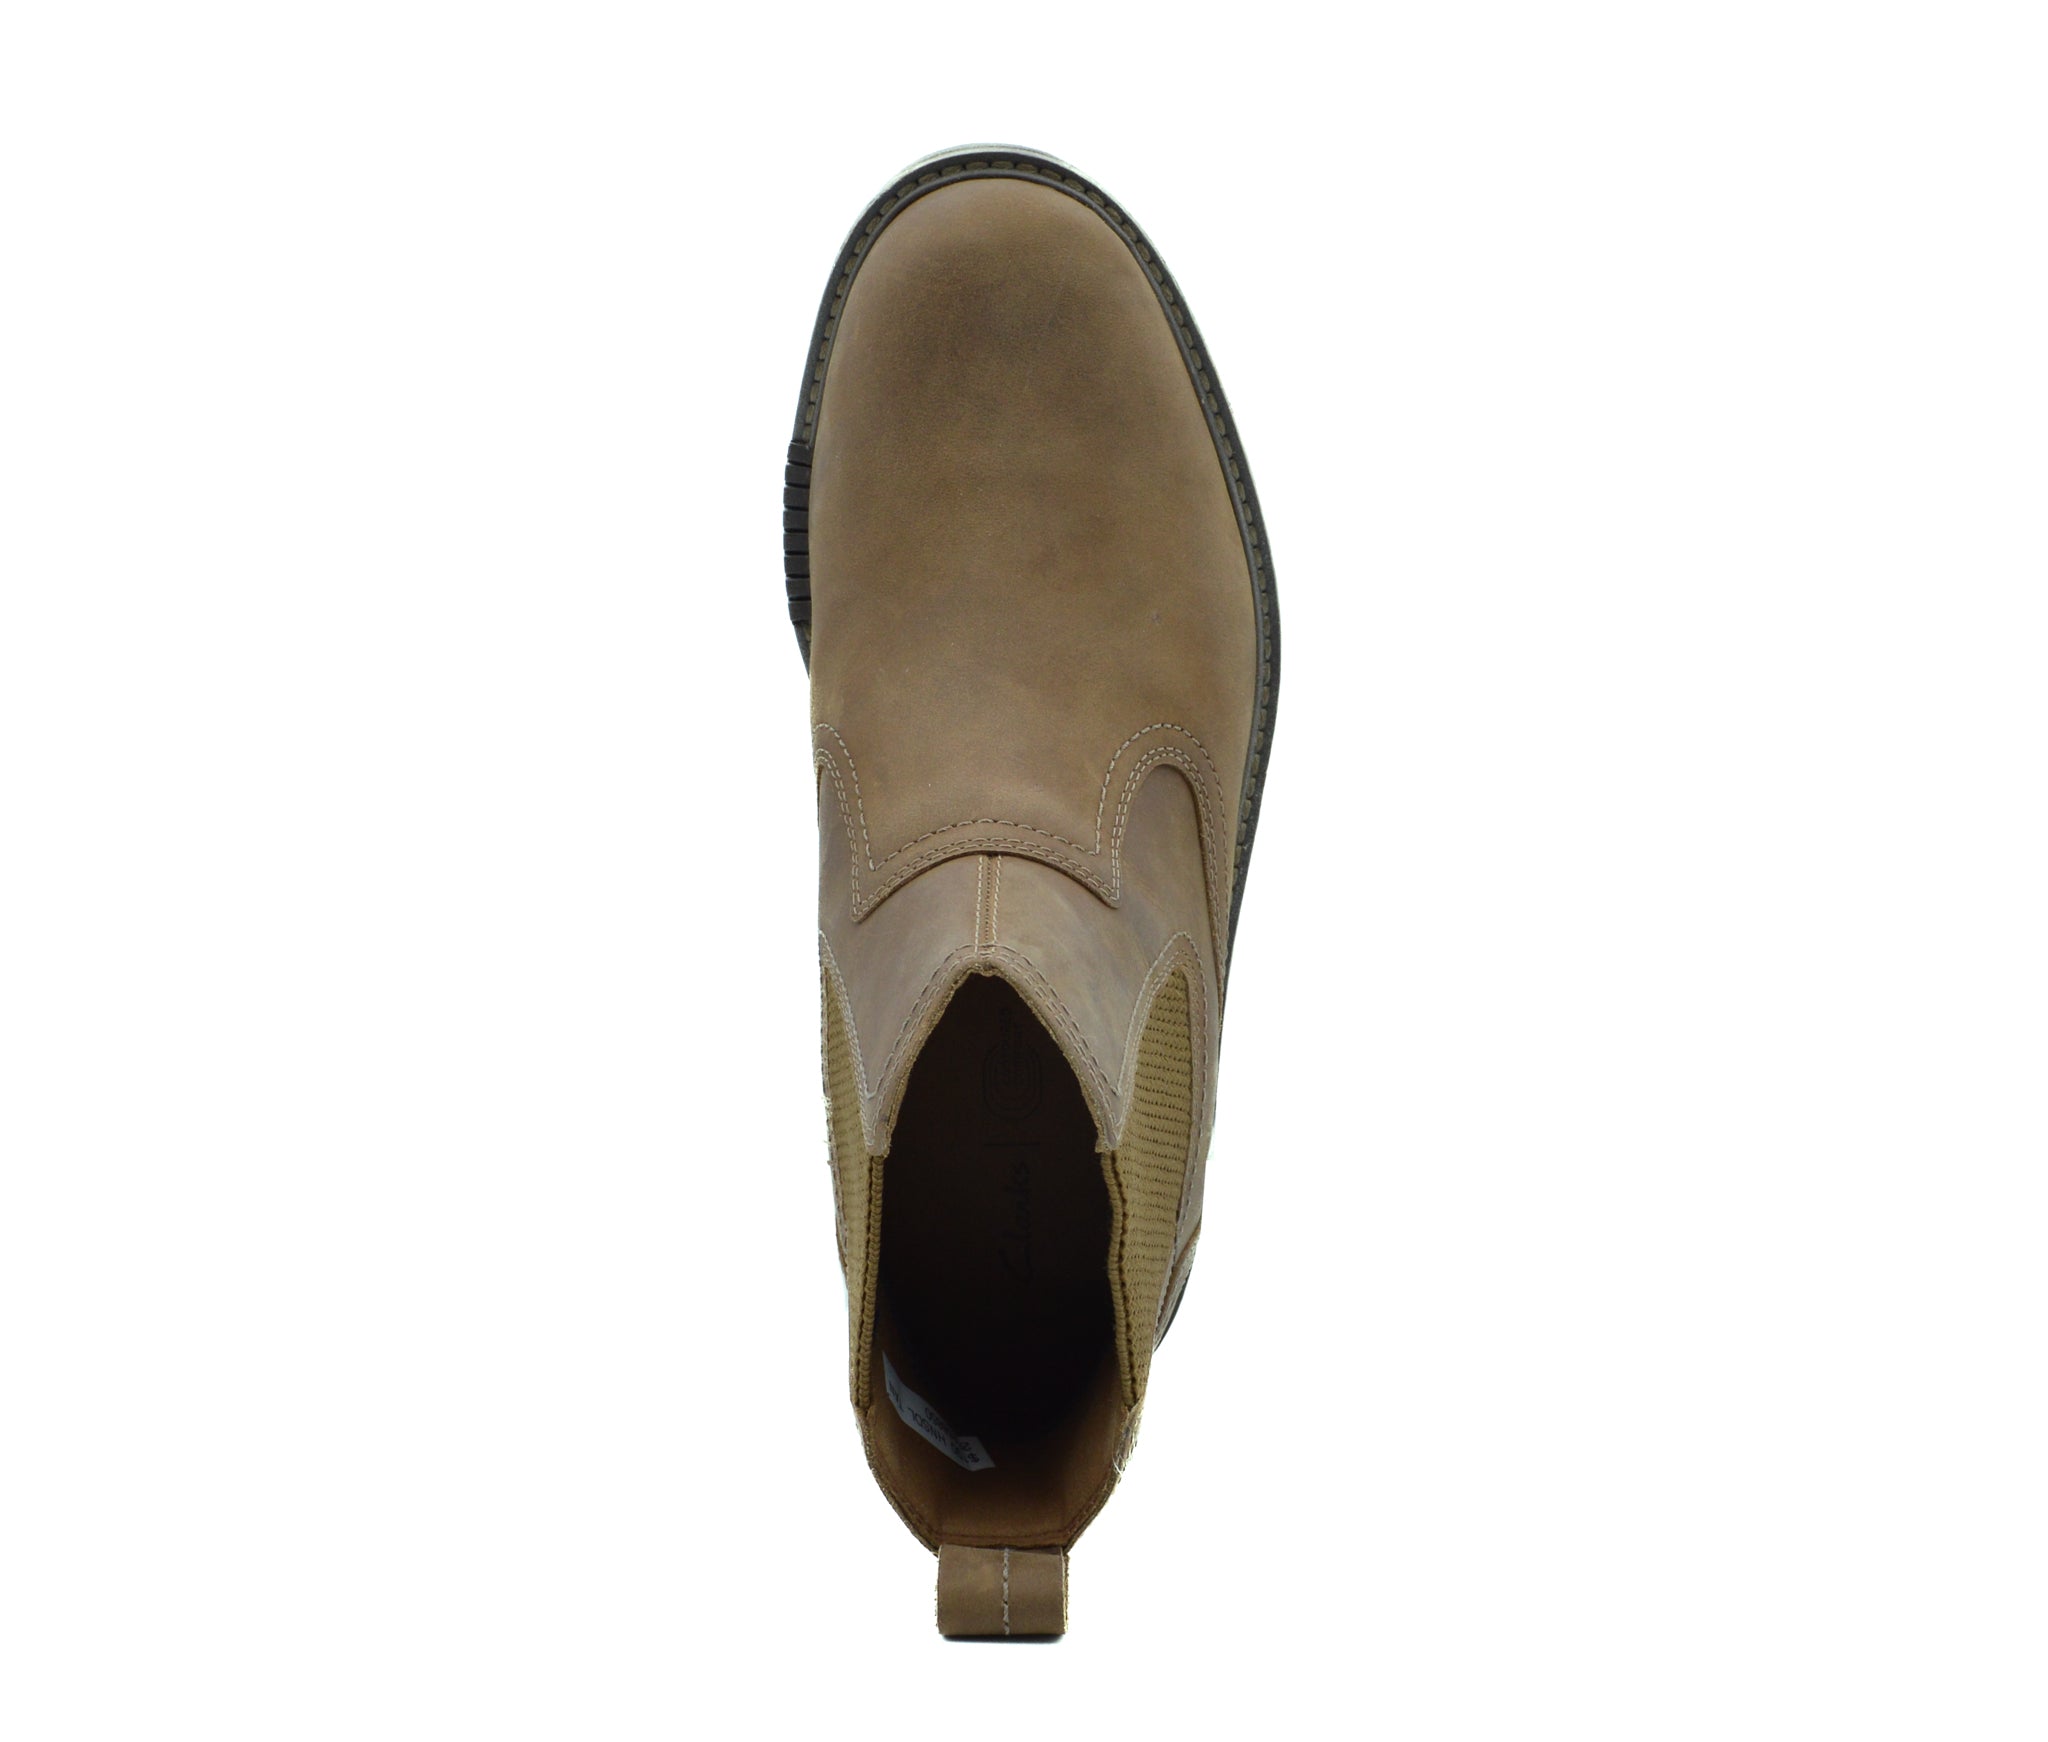 CLARKS Hinsdale Up – Letellier Shoes